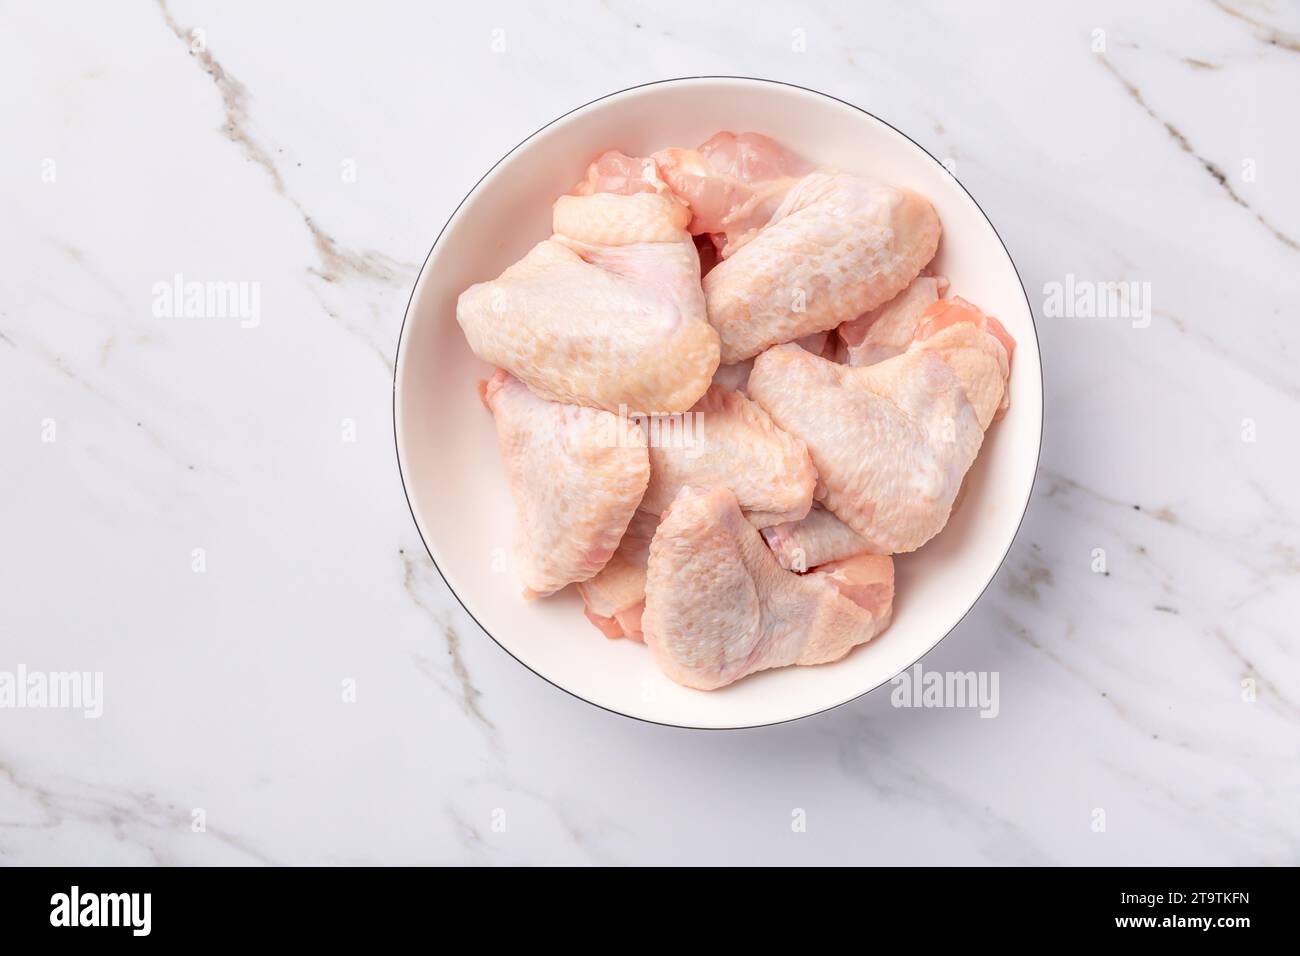 Raw chicken wings in white bowl, prepared for cooking on marble background Stock Photo